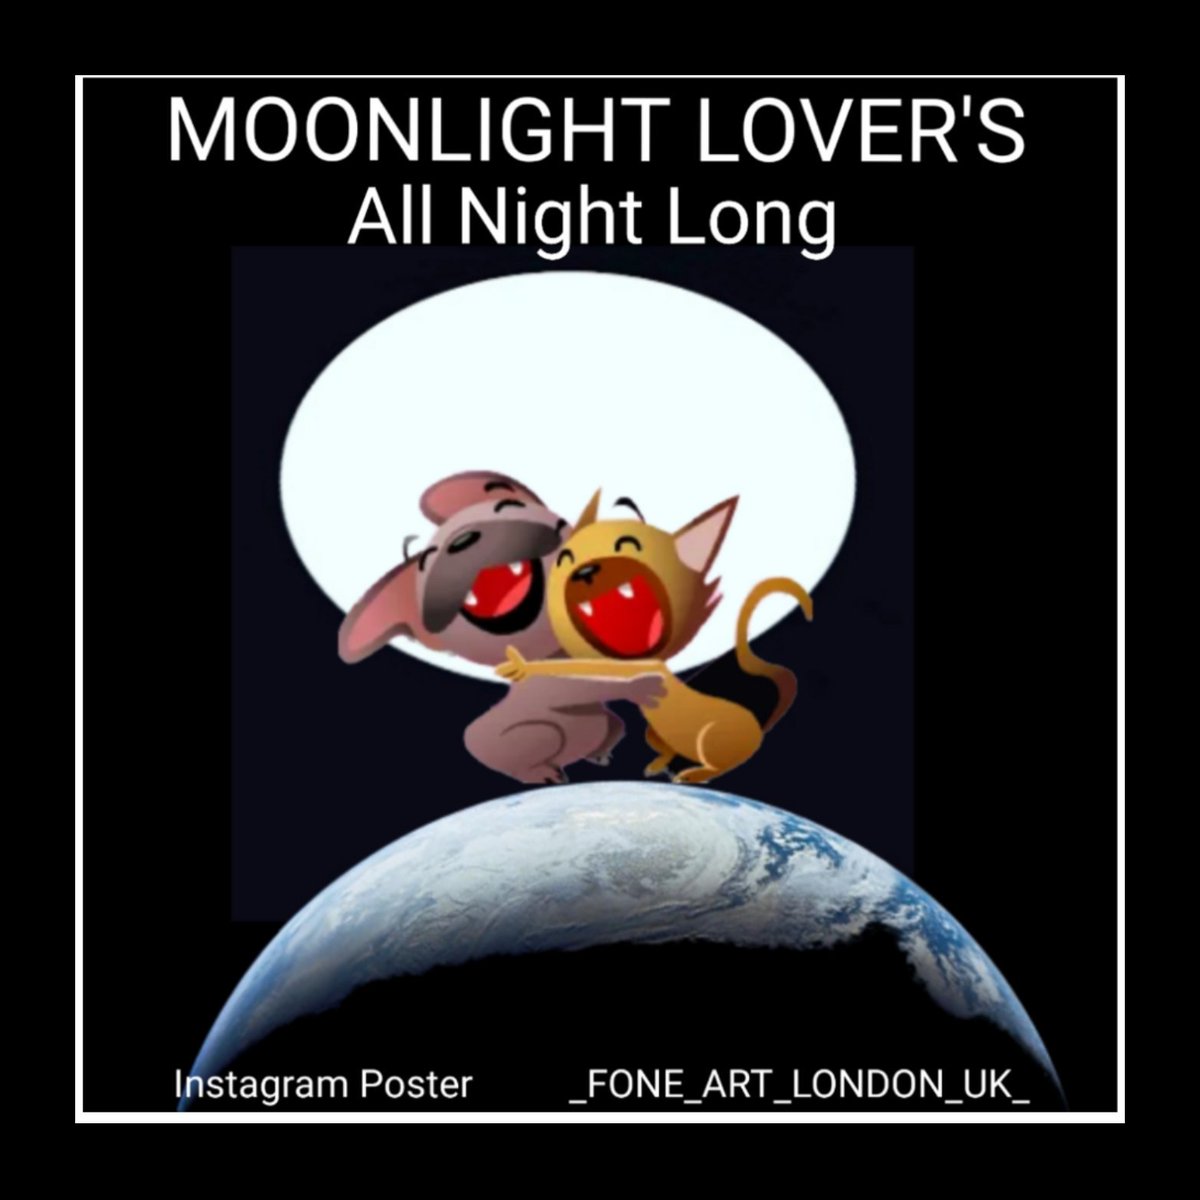 #supermoon
#Posters #are #free #for #all #to #see #here #likeandfollowus
_FONE_ART_LONDON_UK_ 🇬🇧
On @instagram